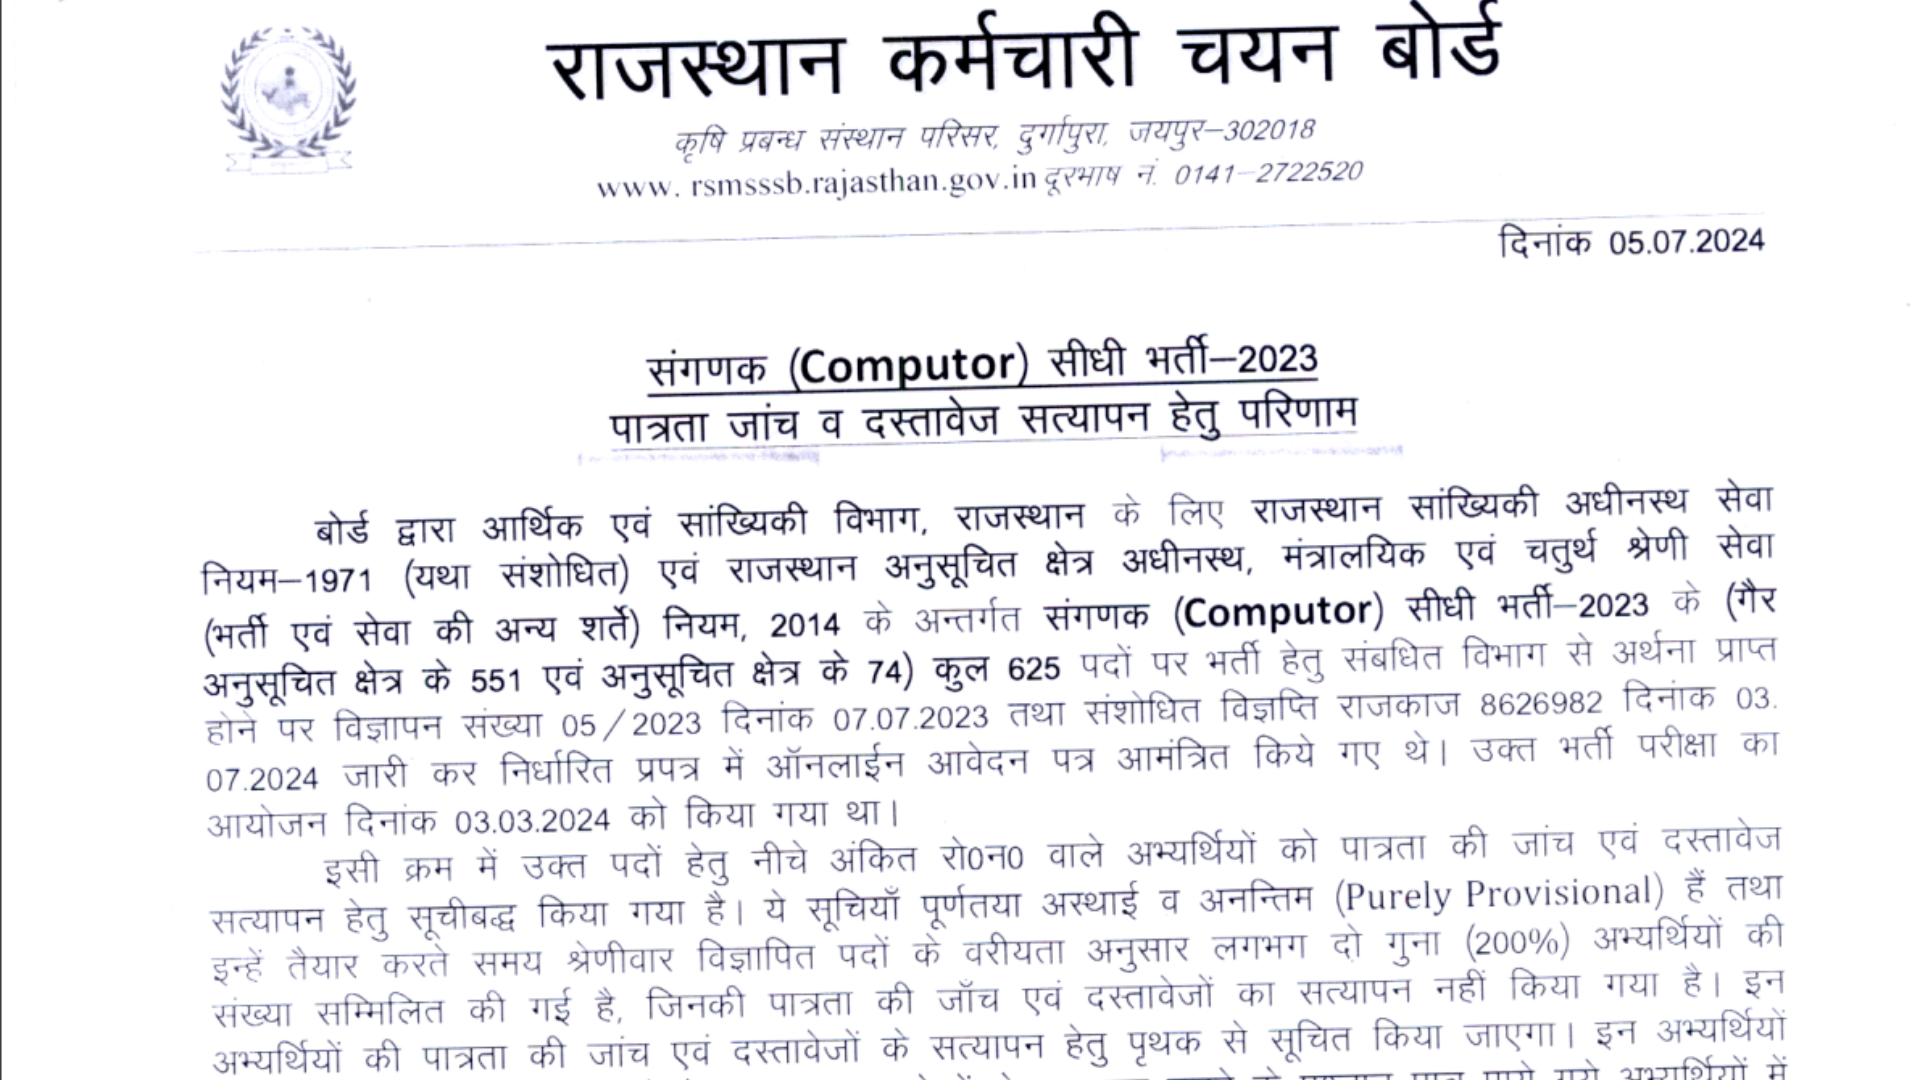 Rajasthan RSMSSB Computor (Sangnak) Recruitment 2023 Exam Result with Marks, Final Answer Key for 583 Post